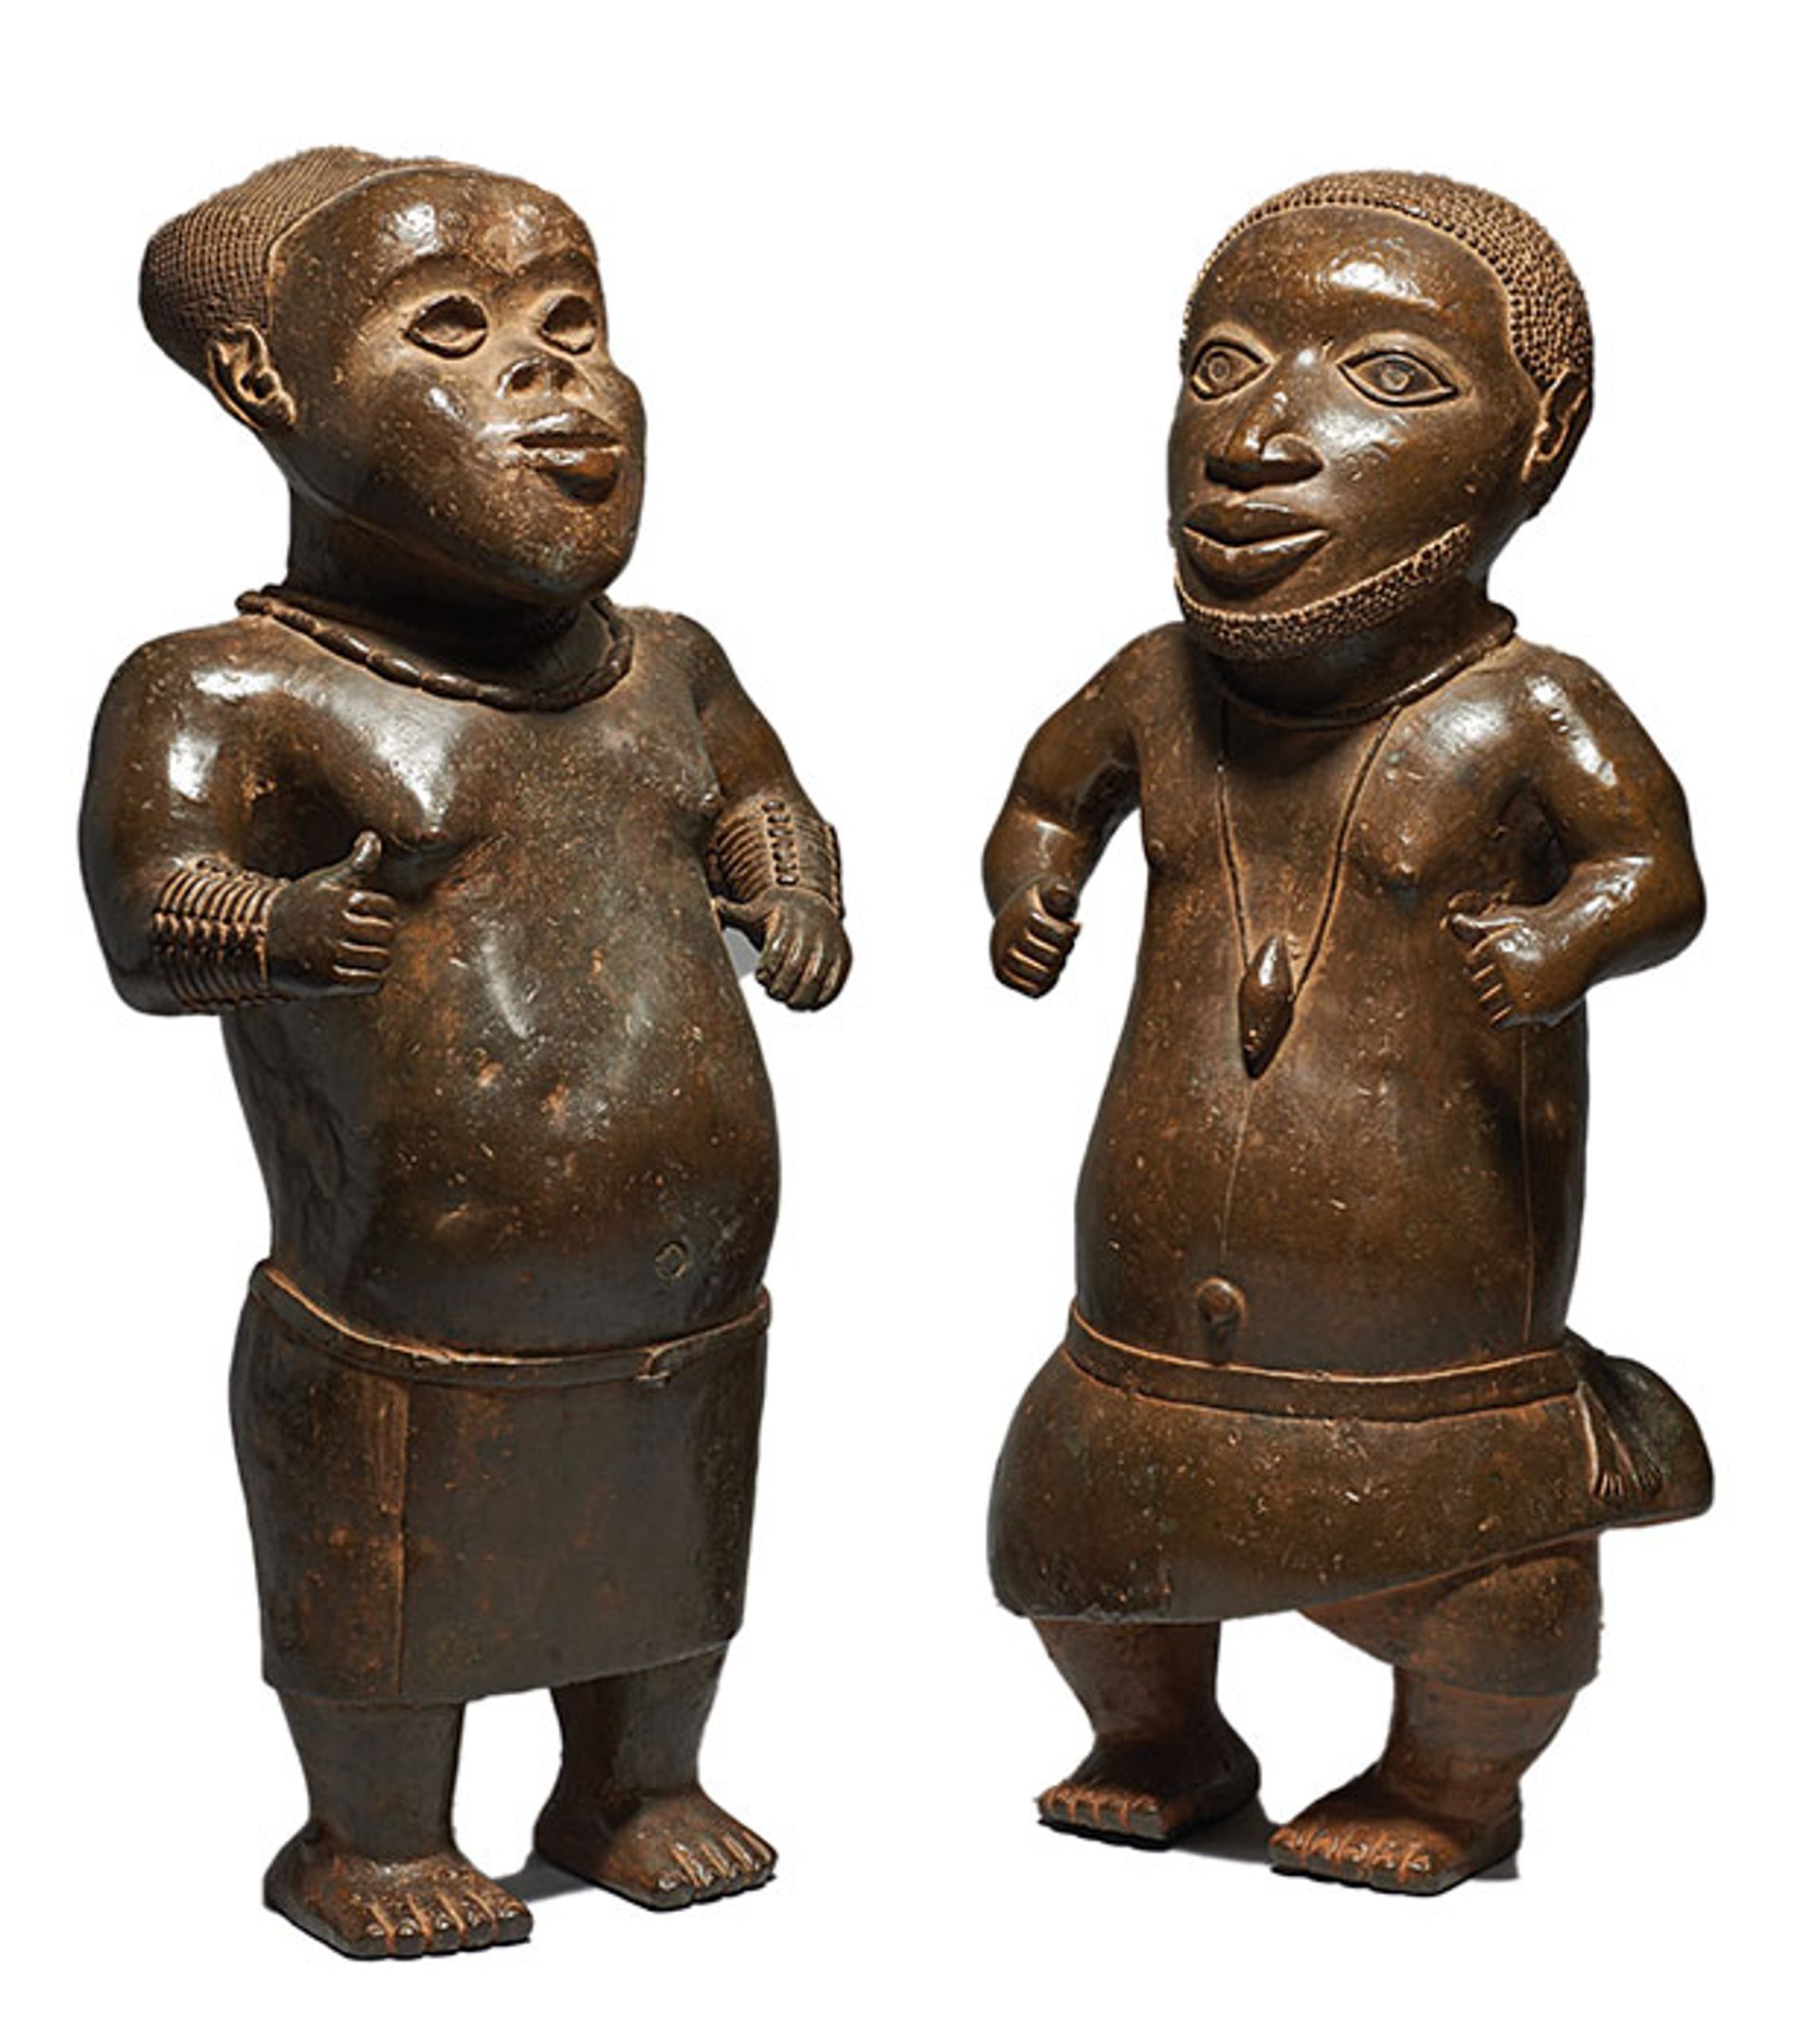 Vienna’s Kunsthistorisches Museum collection includes a number of Benin bronzes © KHM-Museumsverband